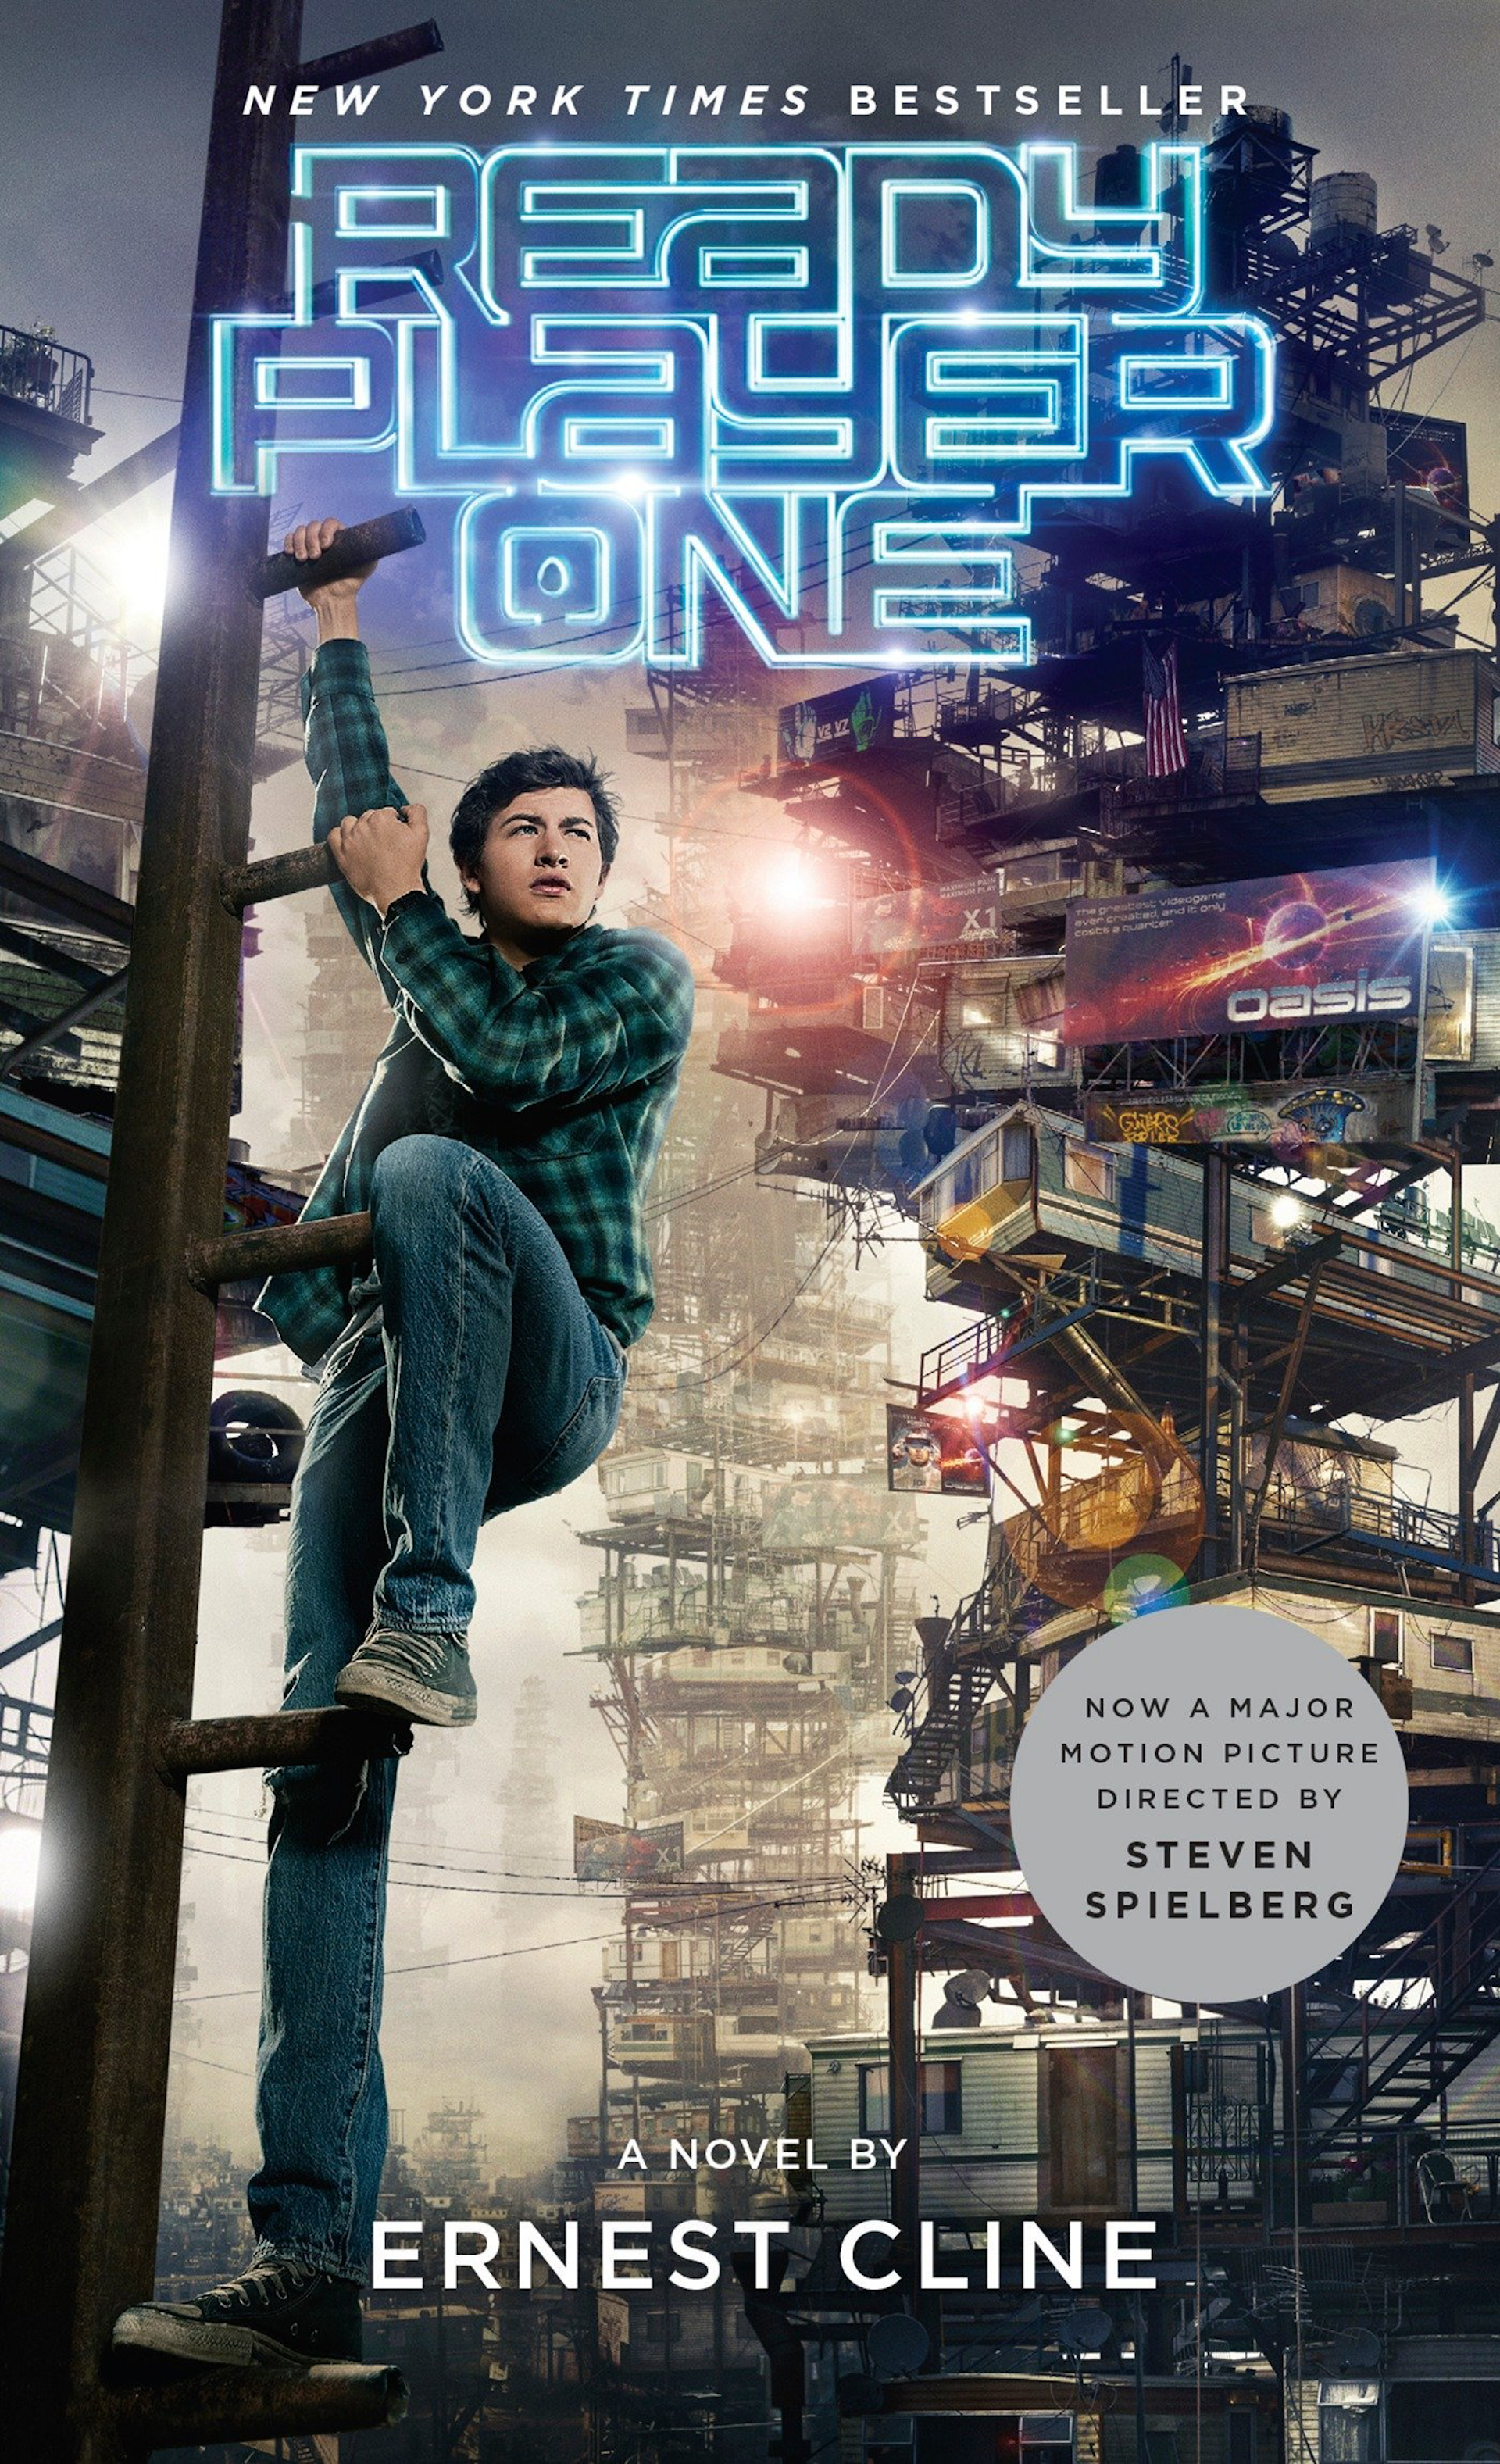 movie ready player one free download